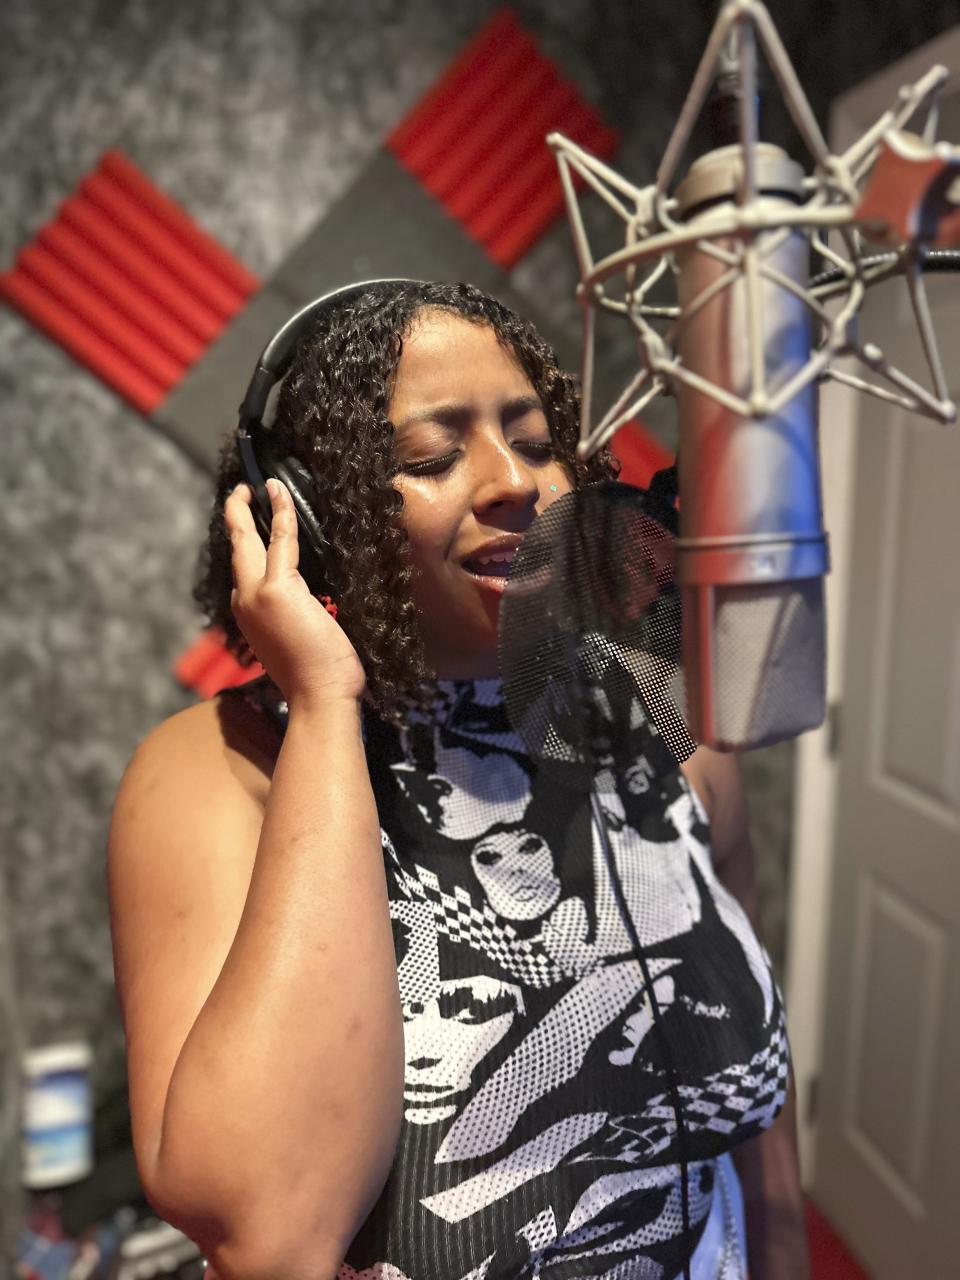 Rapper Itz*Nobi records a song in the booth of a recording studio, June 10, 2023, in Savannah, Ga. Women have fought to shape their identification in hip-hop and demand recognition. At its 50th anniversary, female rappers are taking their moment to shine – while still demanding respect and facing decades-old challenges. My hopes for the future of hip-hop is to definitely see more queer people in the mainstream,” said Itz*Nobi, a femme-presenting non-binary rapper. “We definitely have such an interesting angle to share as far as just humanity and being a person.” (AP Photo/Sharon Johnson)